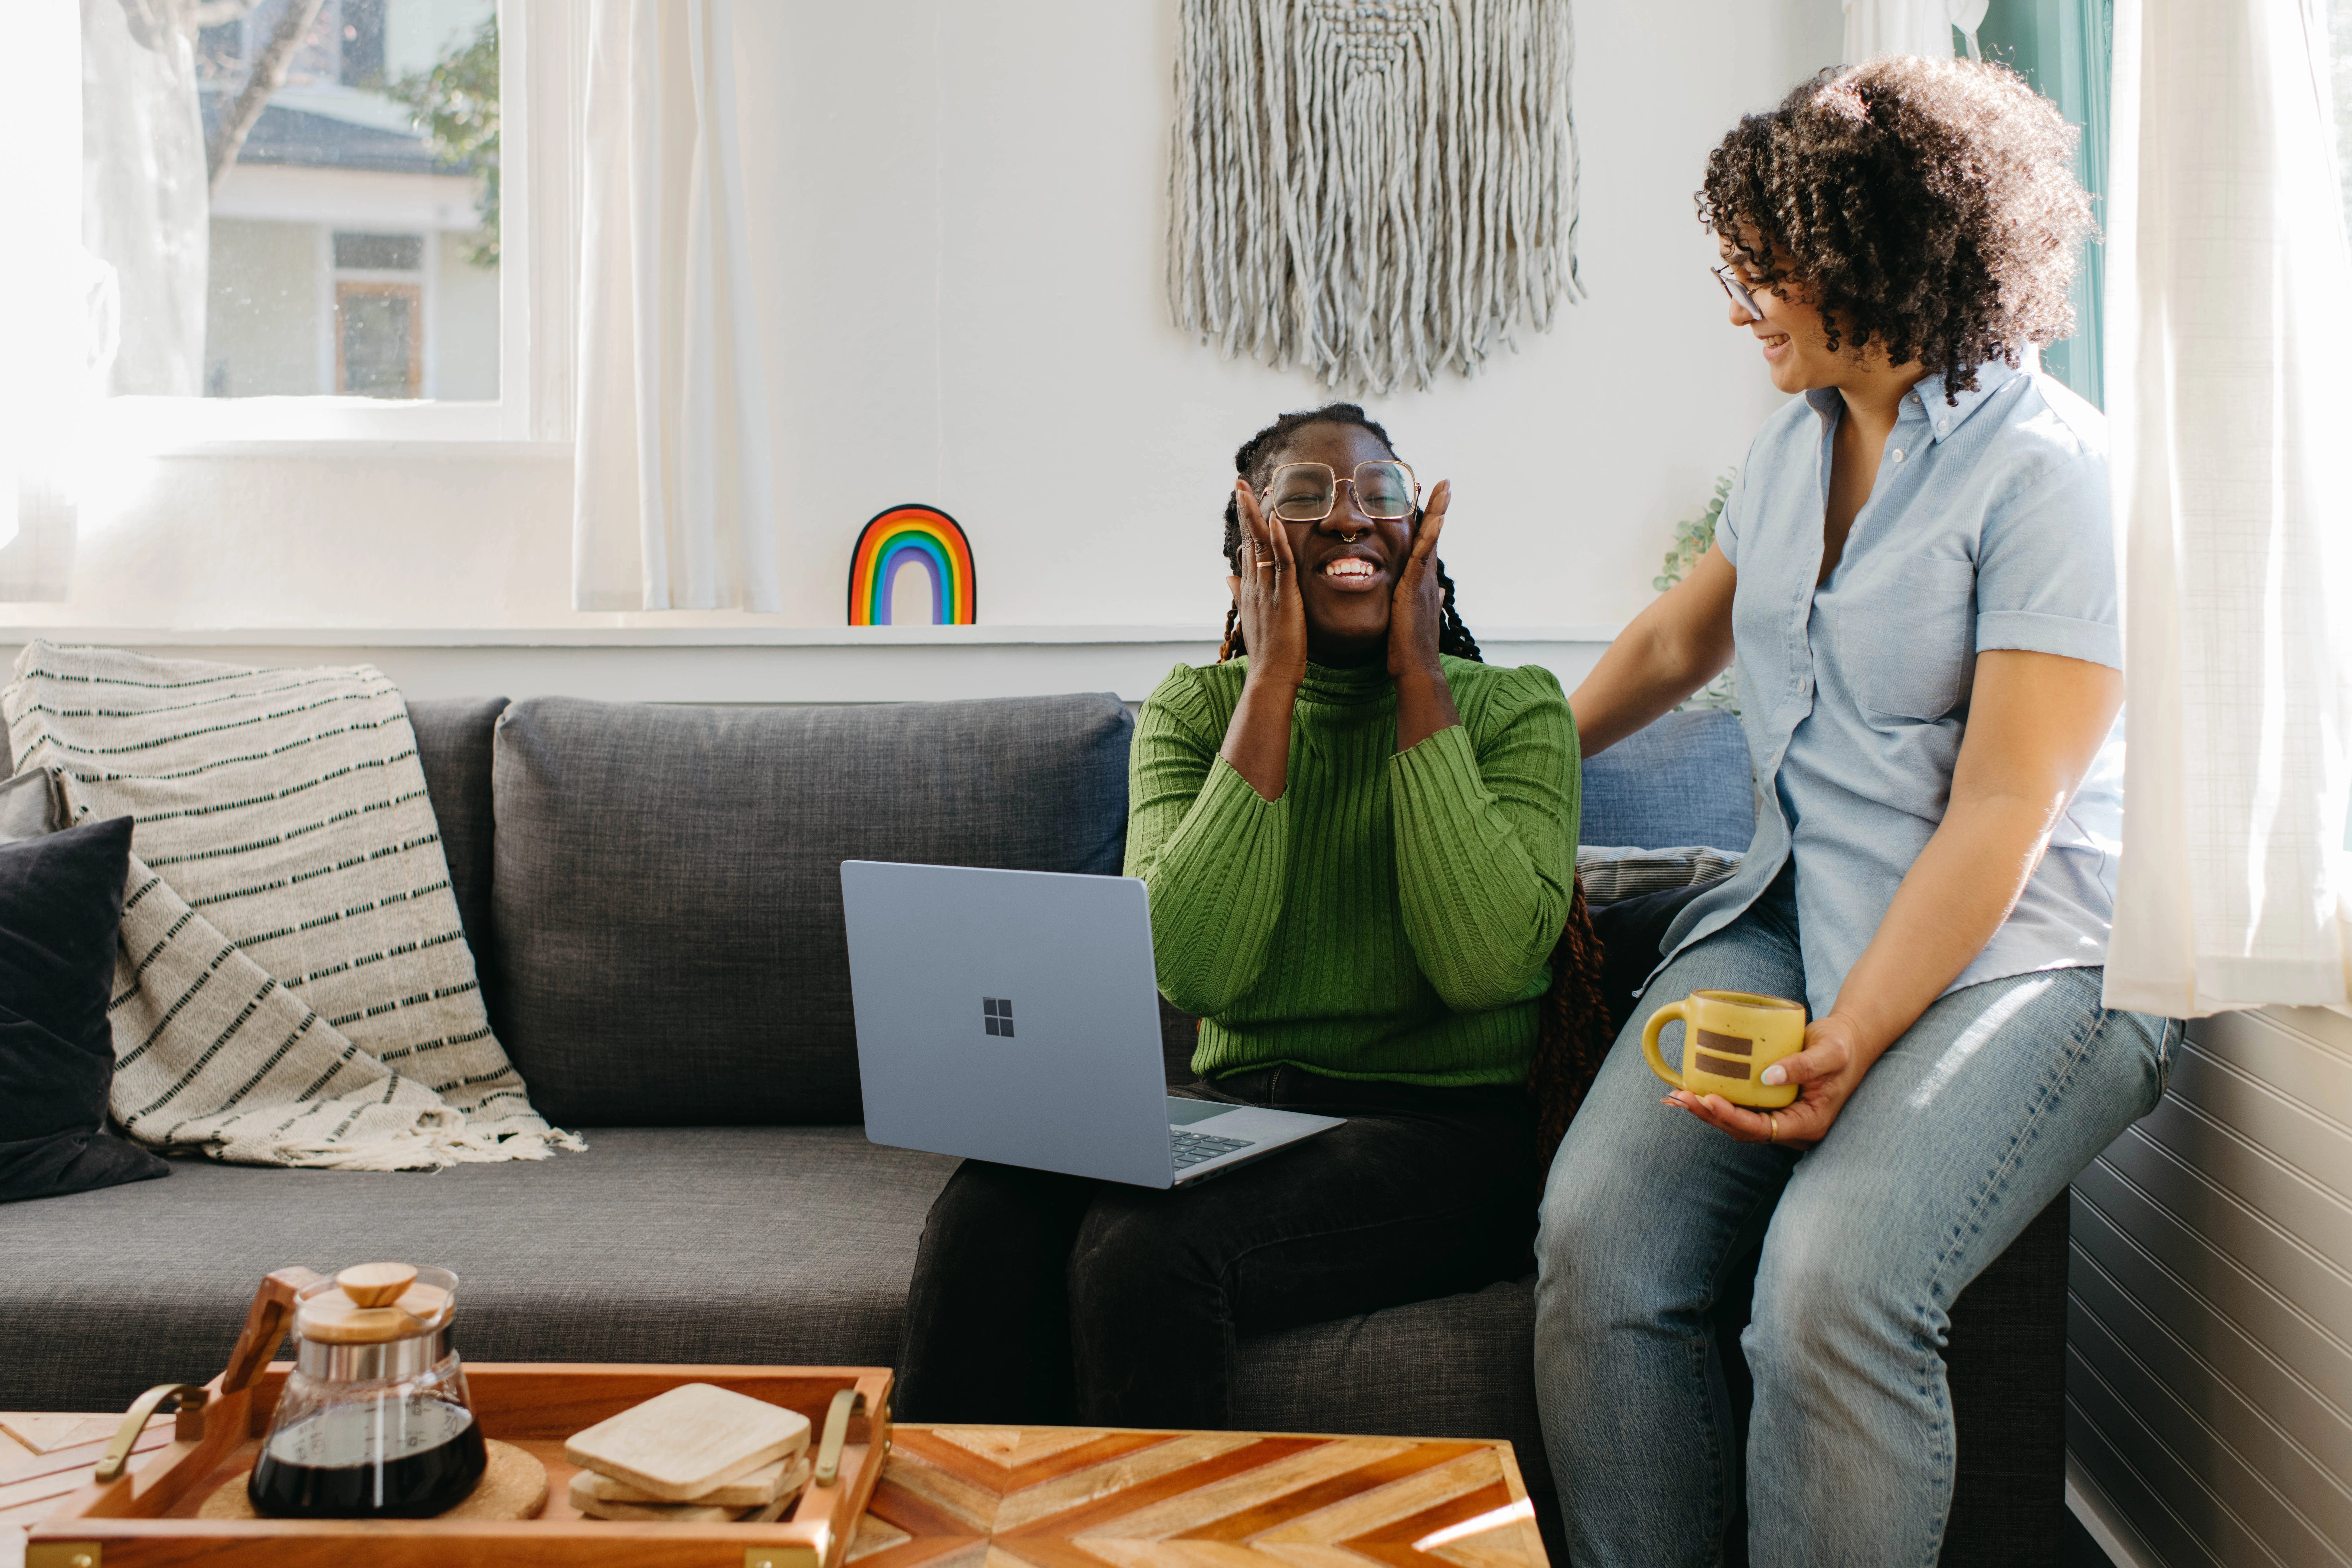 Two women are smiling, sitting on a grey sofa with a laptop, looking at the Privy app